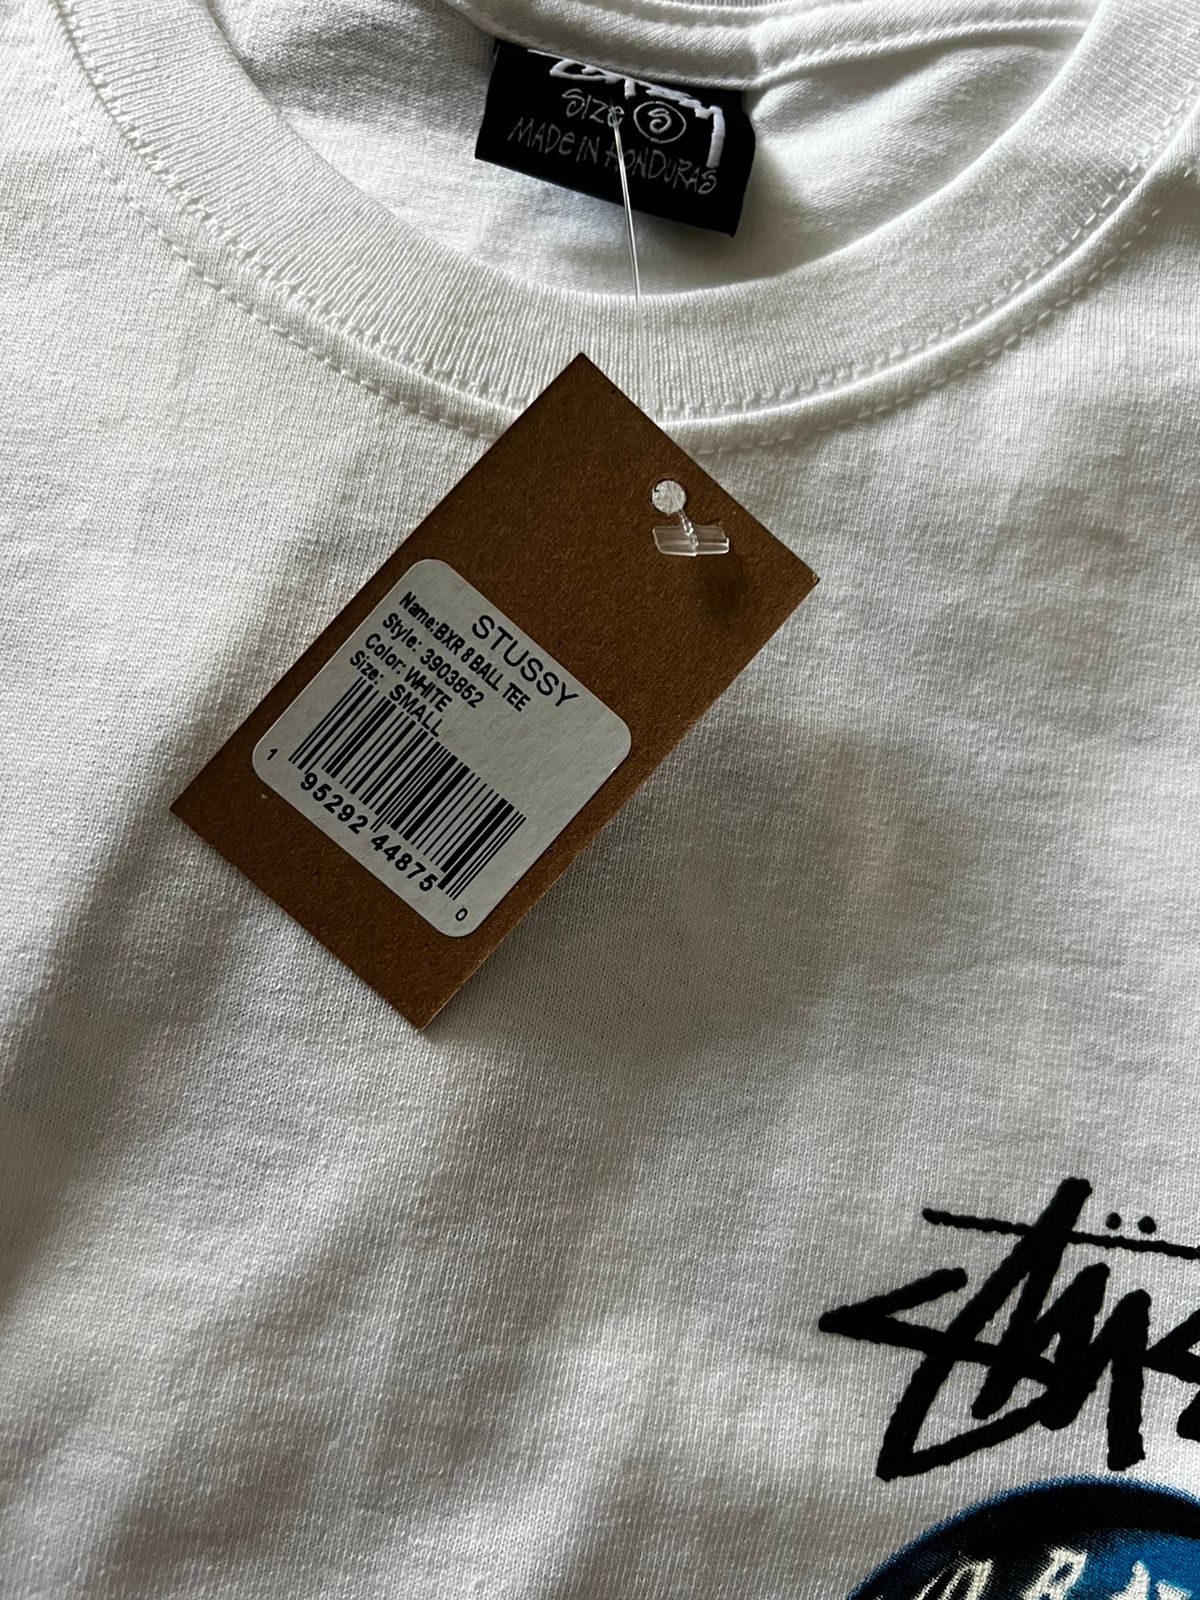 Stussy STUSSY Born x Raised 8 Ball Tee - Size Large IN HAND | Grailed